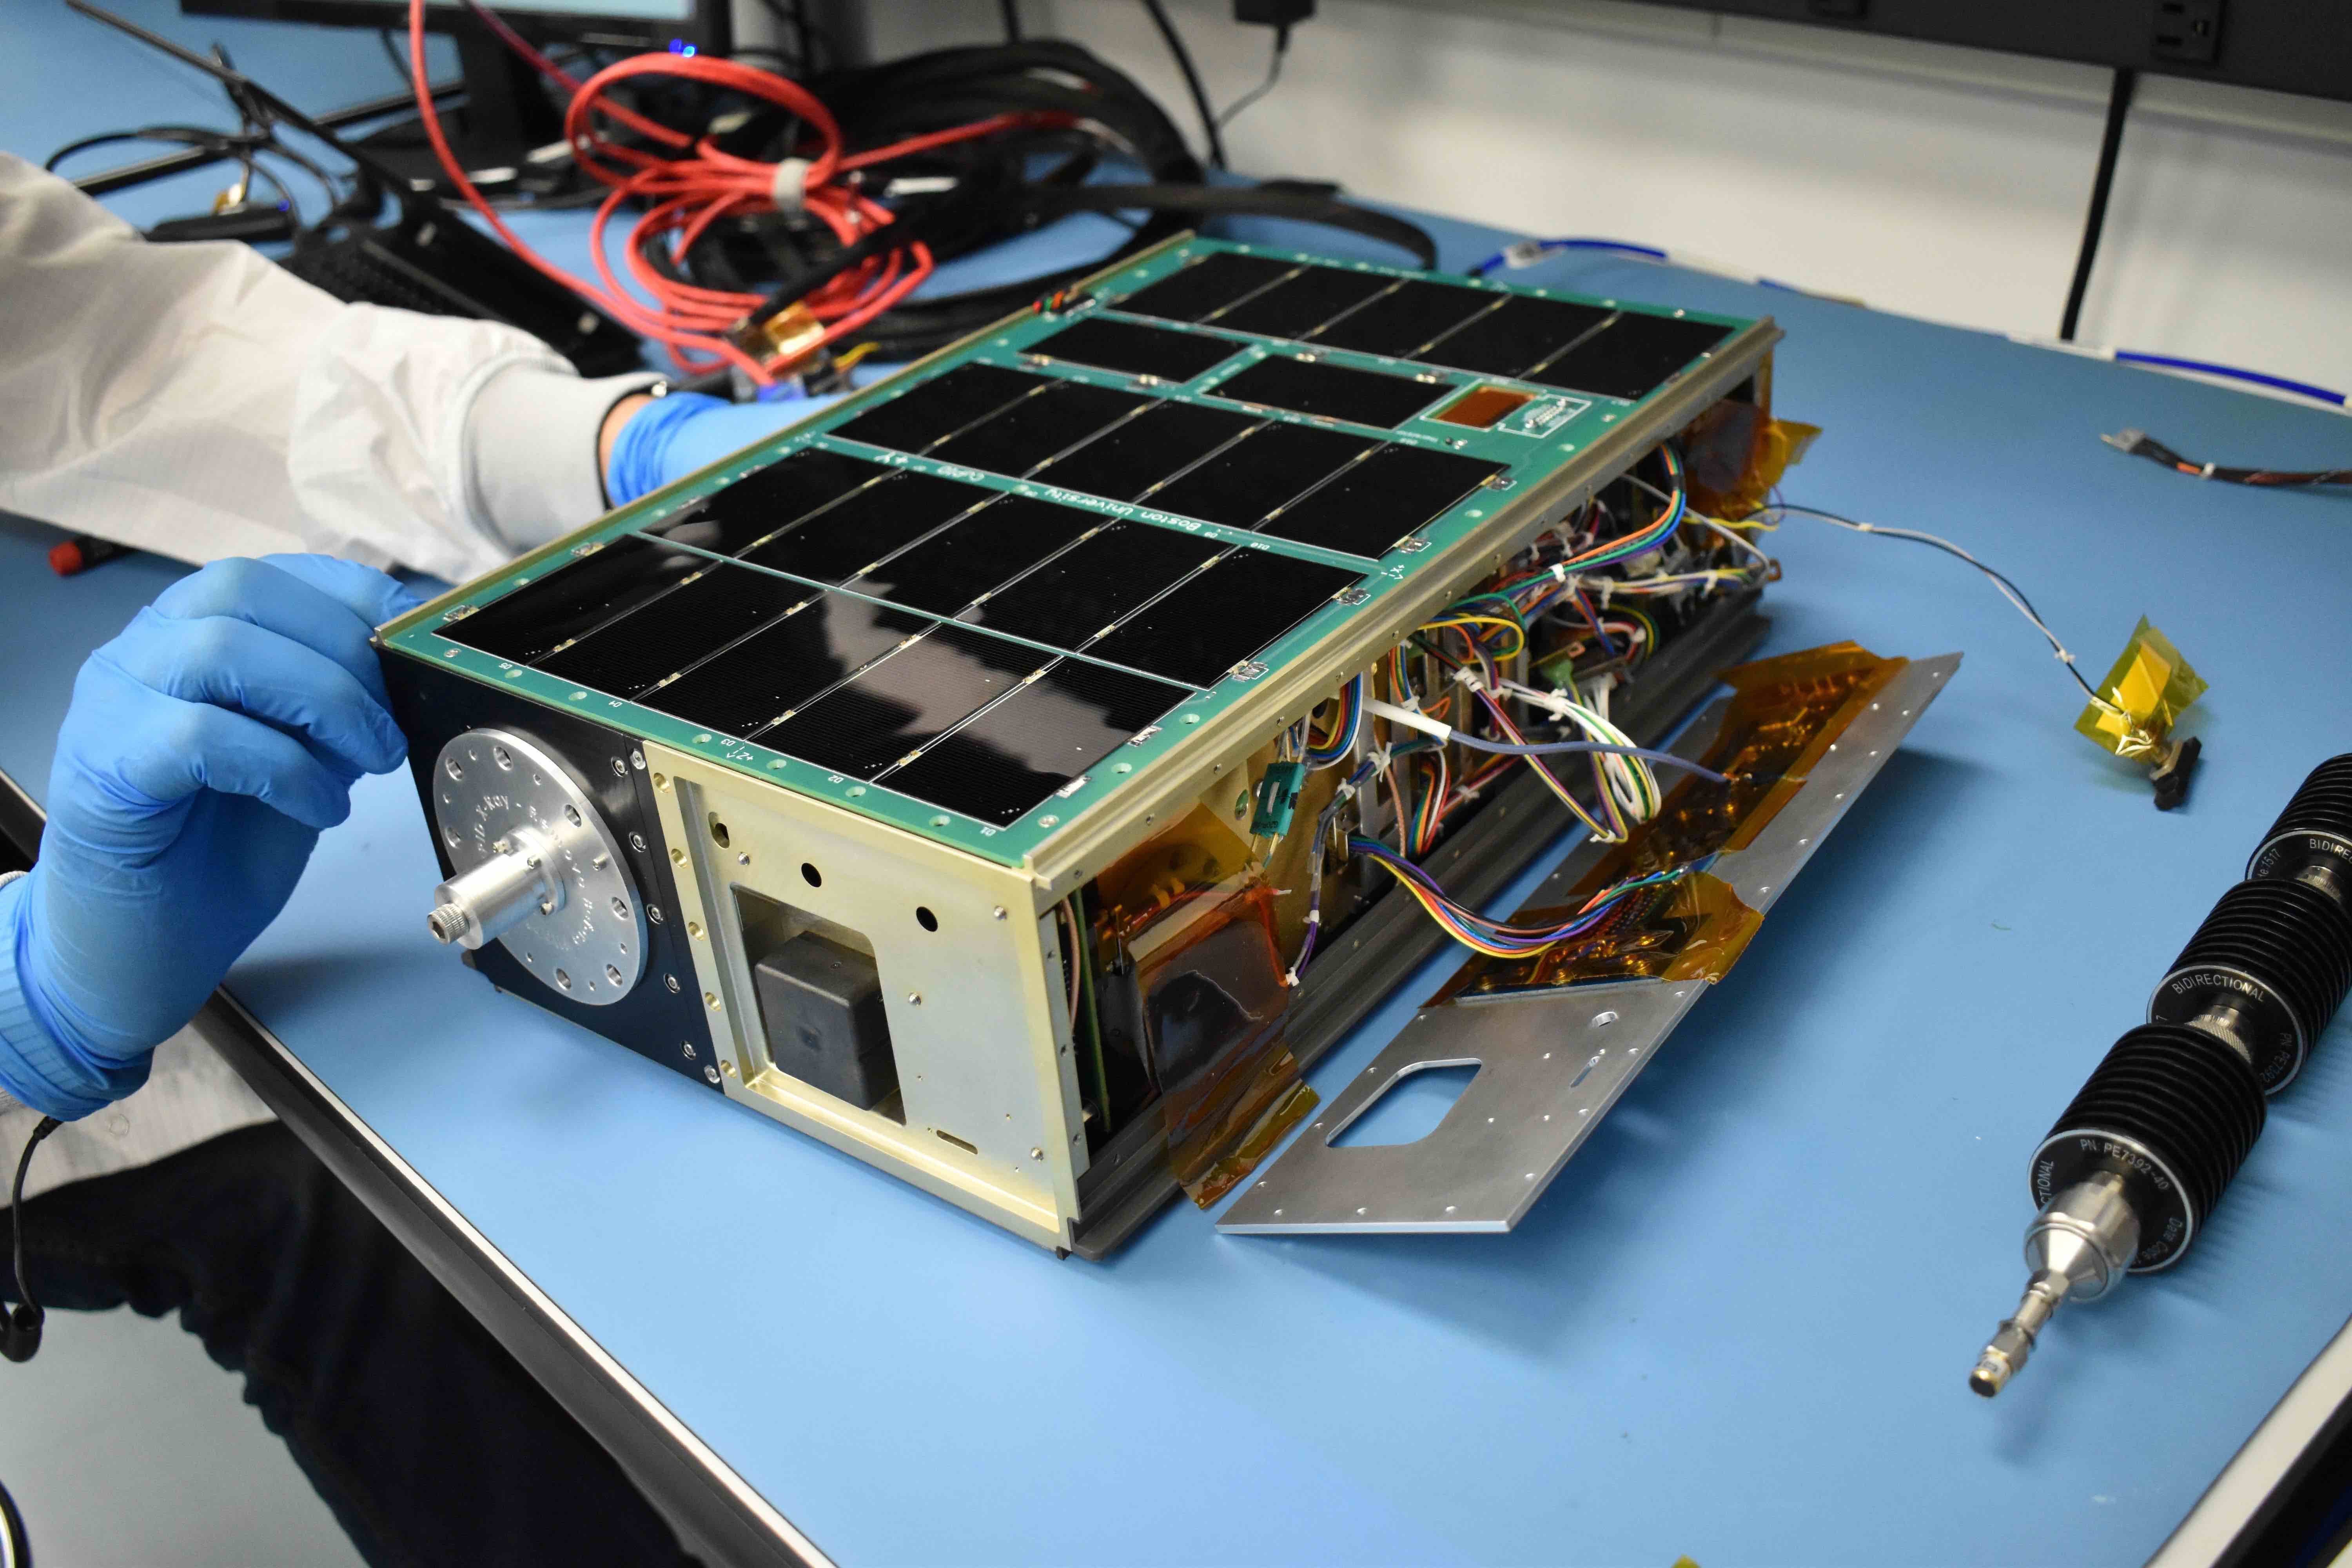 A person in gloves works on a small satellite, called a cubesat, on a table.